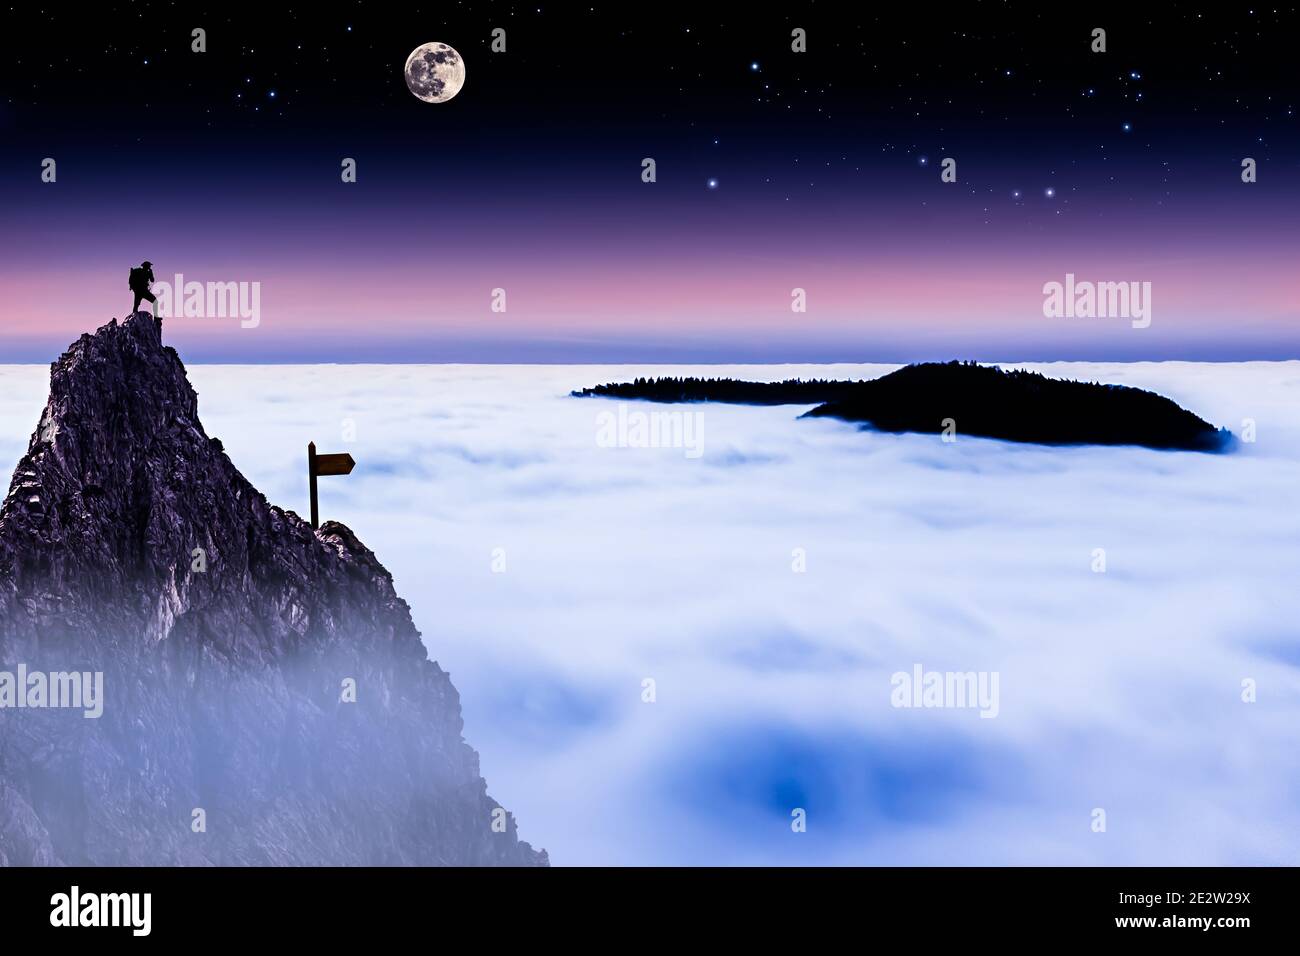 Hiker on Top of a Mountain Looking Over the Cloud Cover at Night Stock Photo